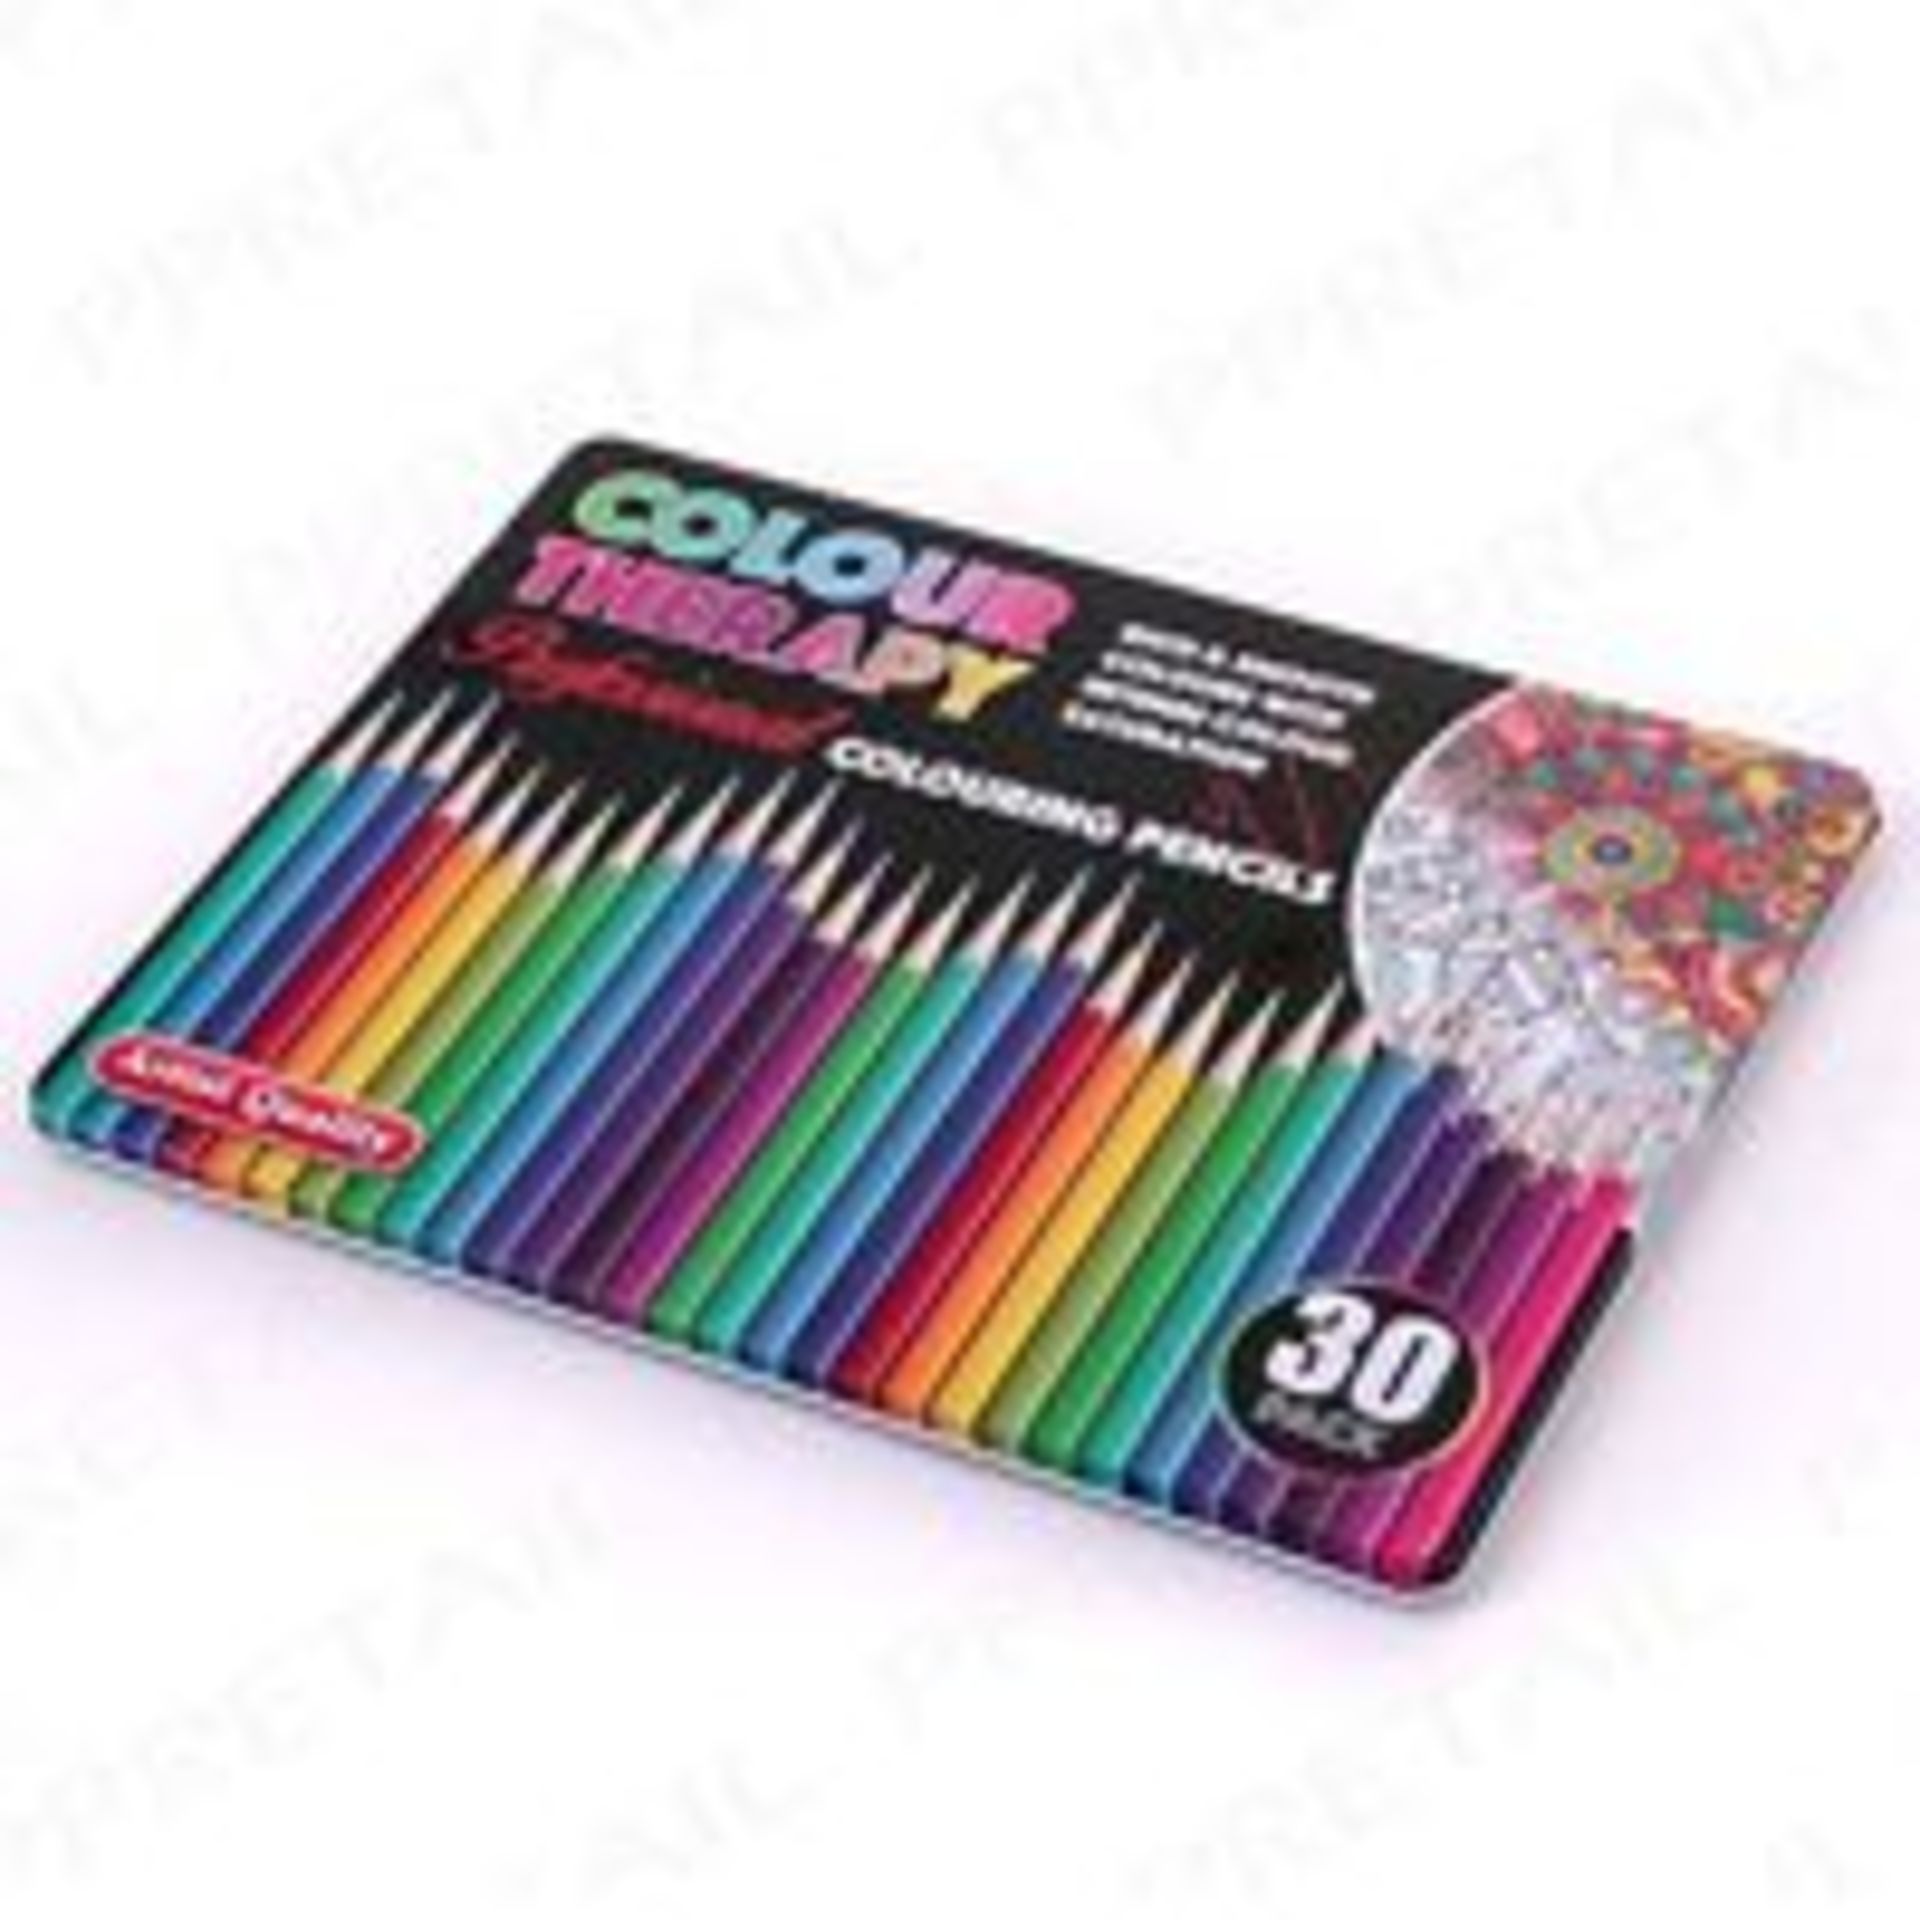 V *TRADE QTY* Brand New 30 Pack Professional Colouring Pencils - Artist Quality X 5 YOUR BID PRICE